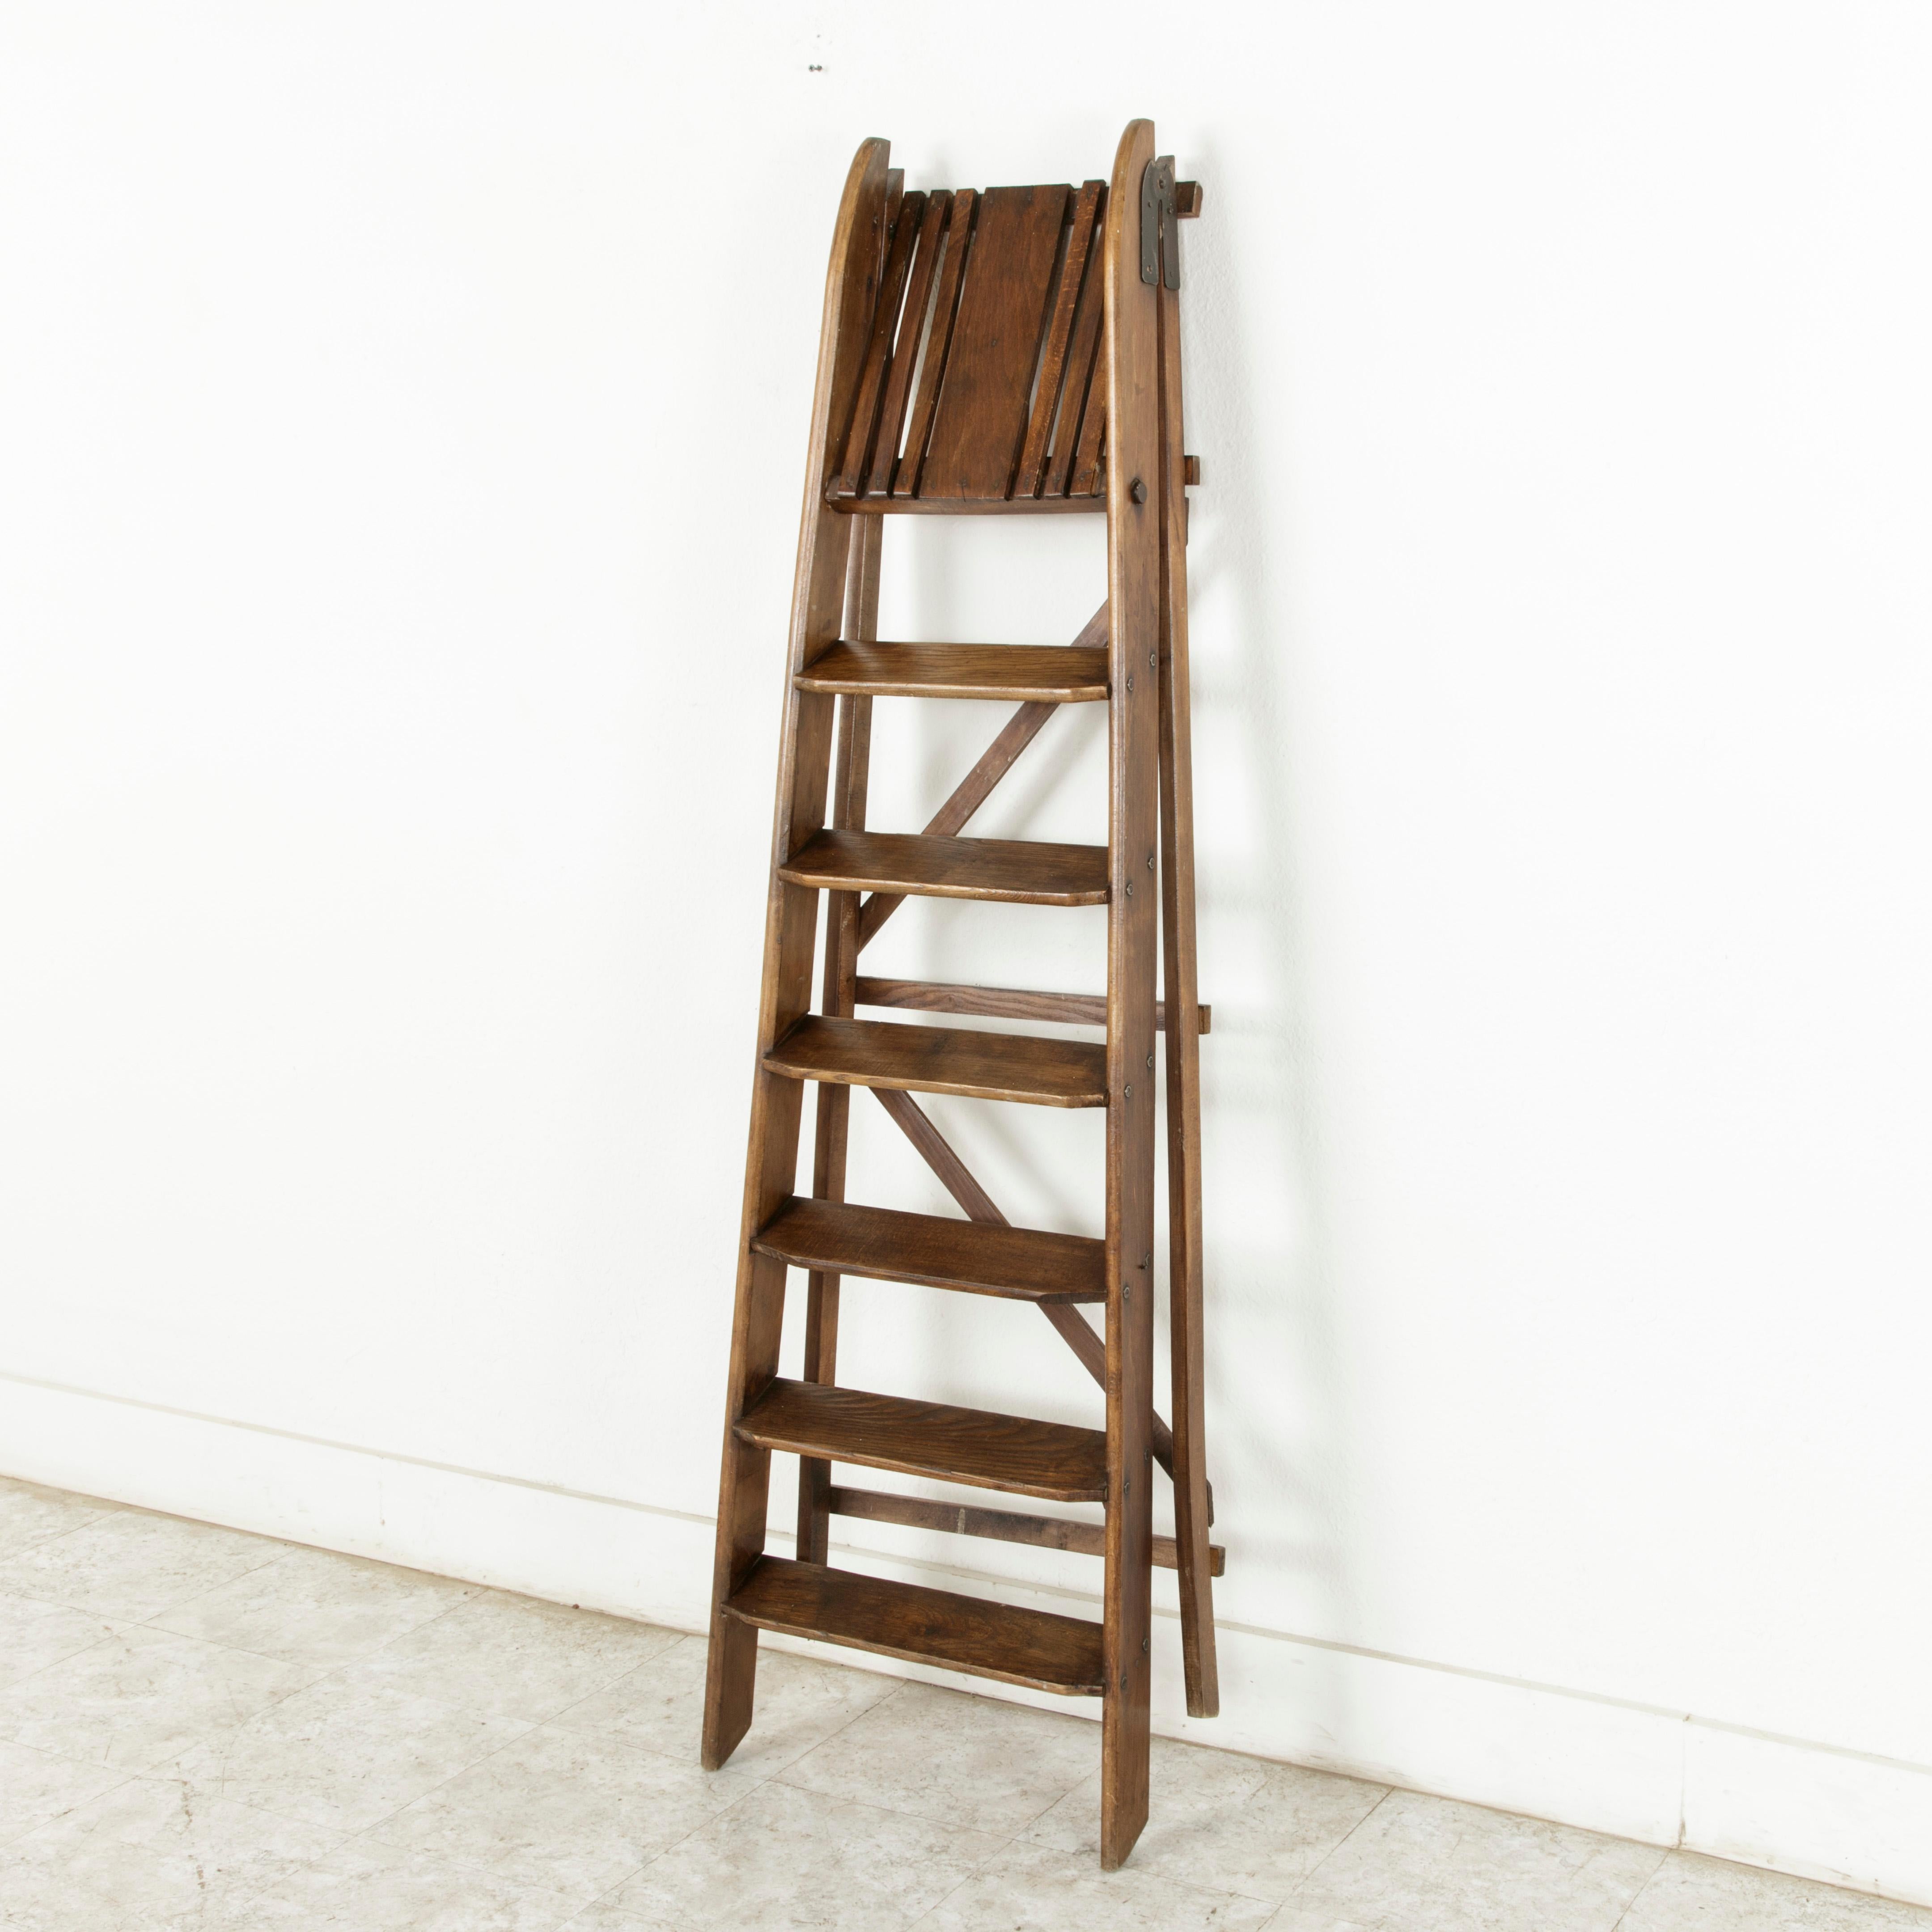 This artisan-made French library ladder from the turn of the 20th century features iron hinges that allow it to be folded flat for storing. Constructed using mixed woods, a practice common among artisans of the period, this ladder is fitted with six